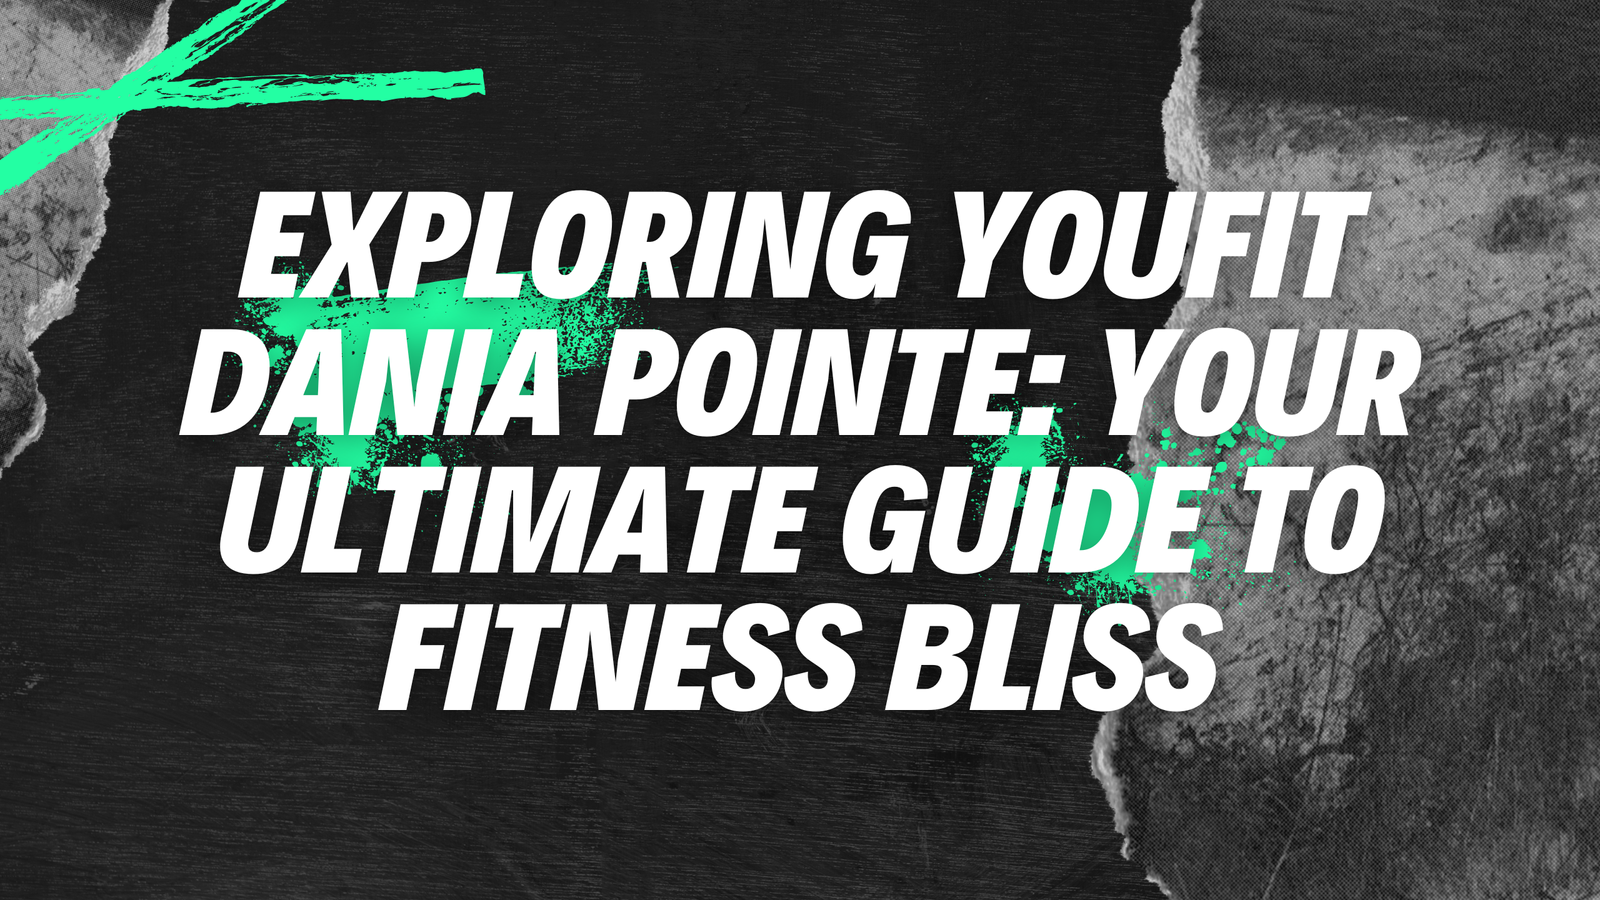 Exploring Youfit Dania Pointe: Your Ultimate Guide to Fitness Bliss